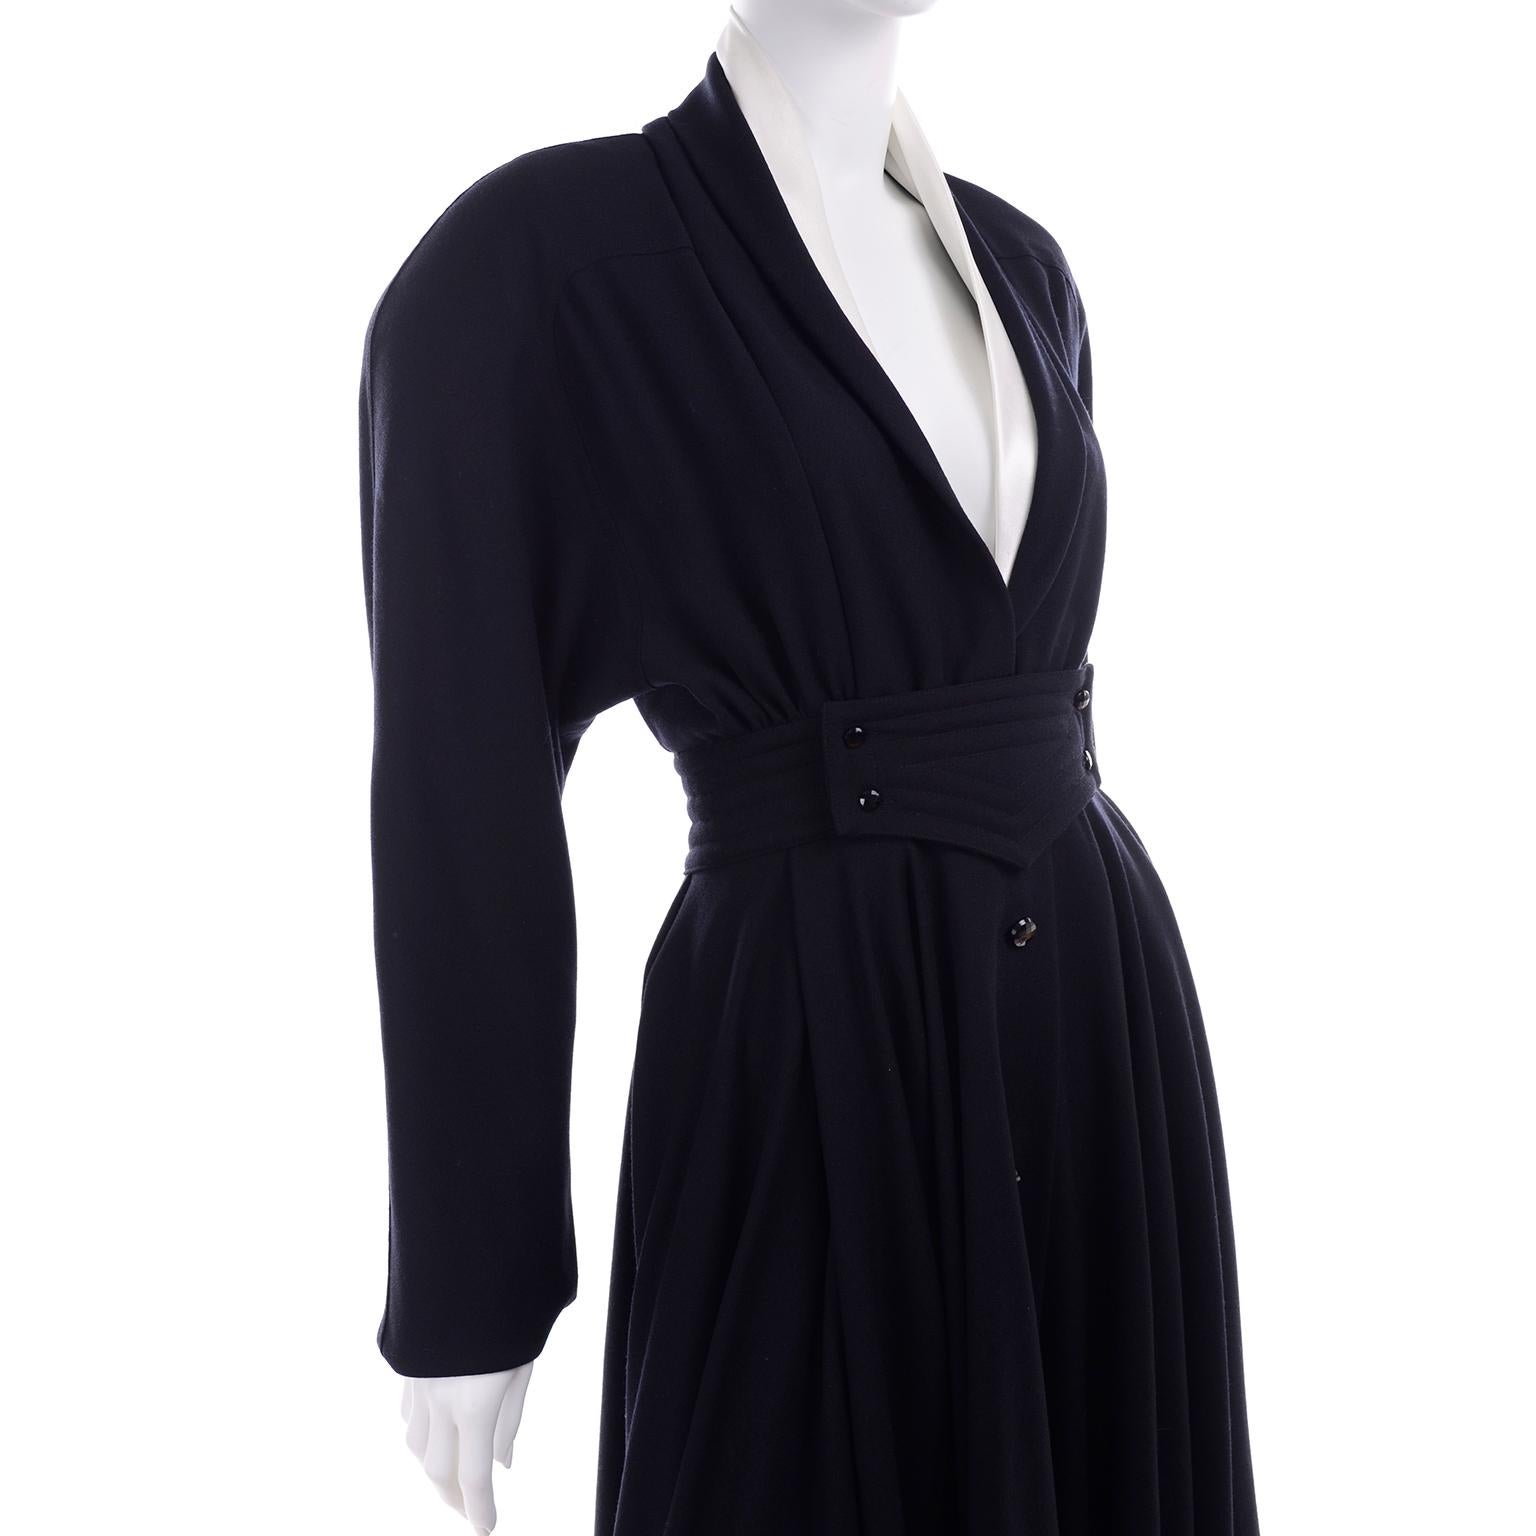 Deadstock Wayne Clark Couture Vintage Wool 1980s Dress New With Original Tags For Sale 1